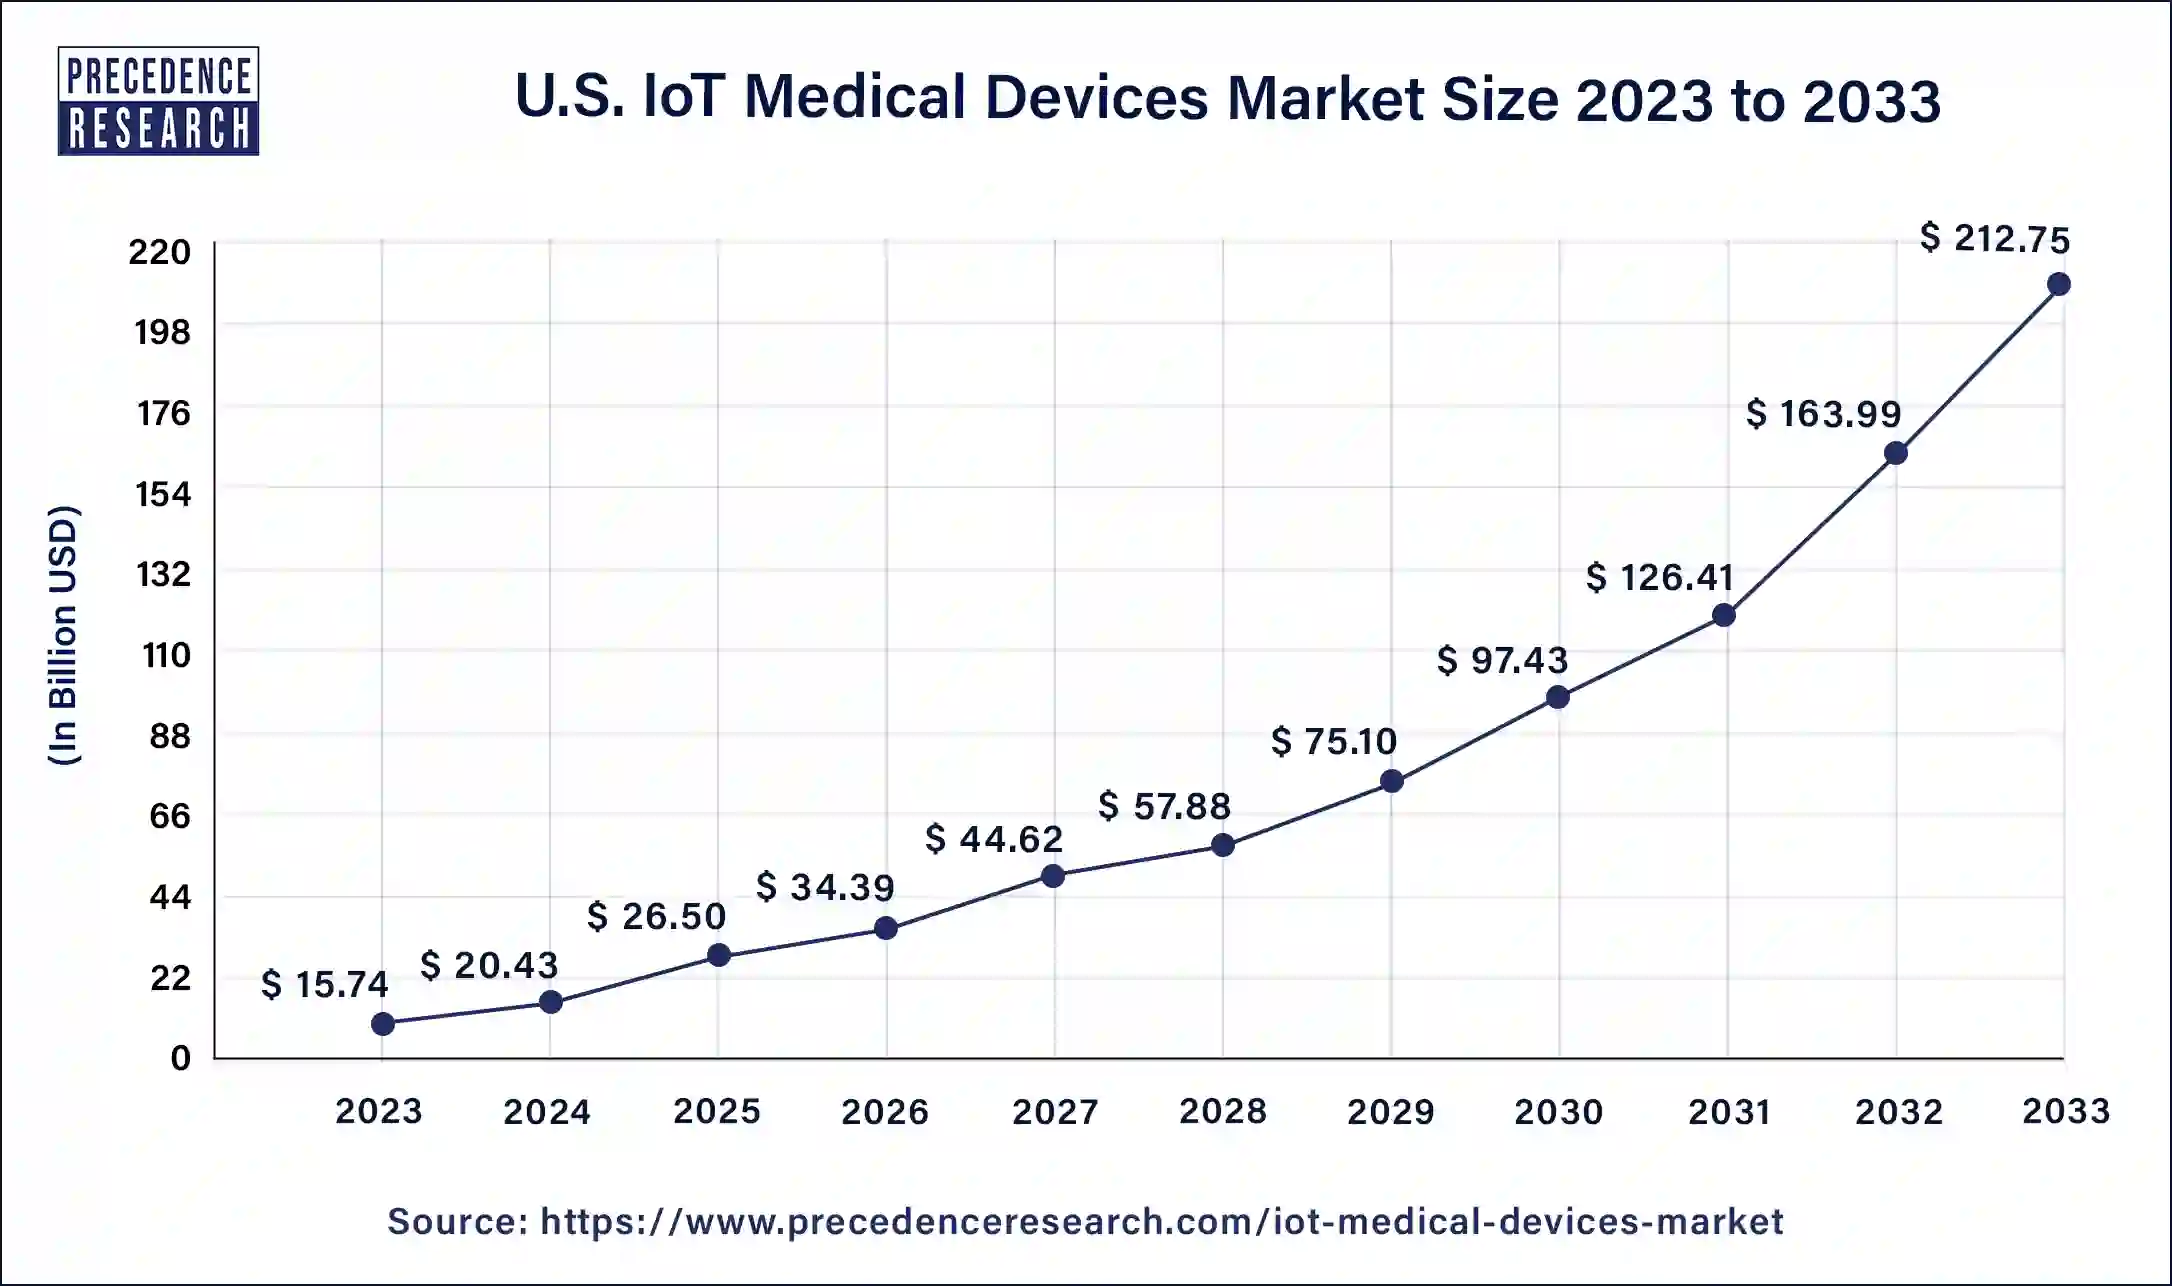 U.S. IoT Medical Devices Market Size 2024 to 2033